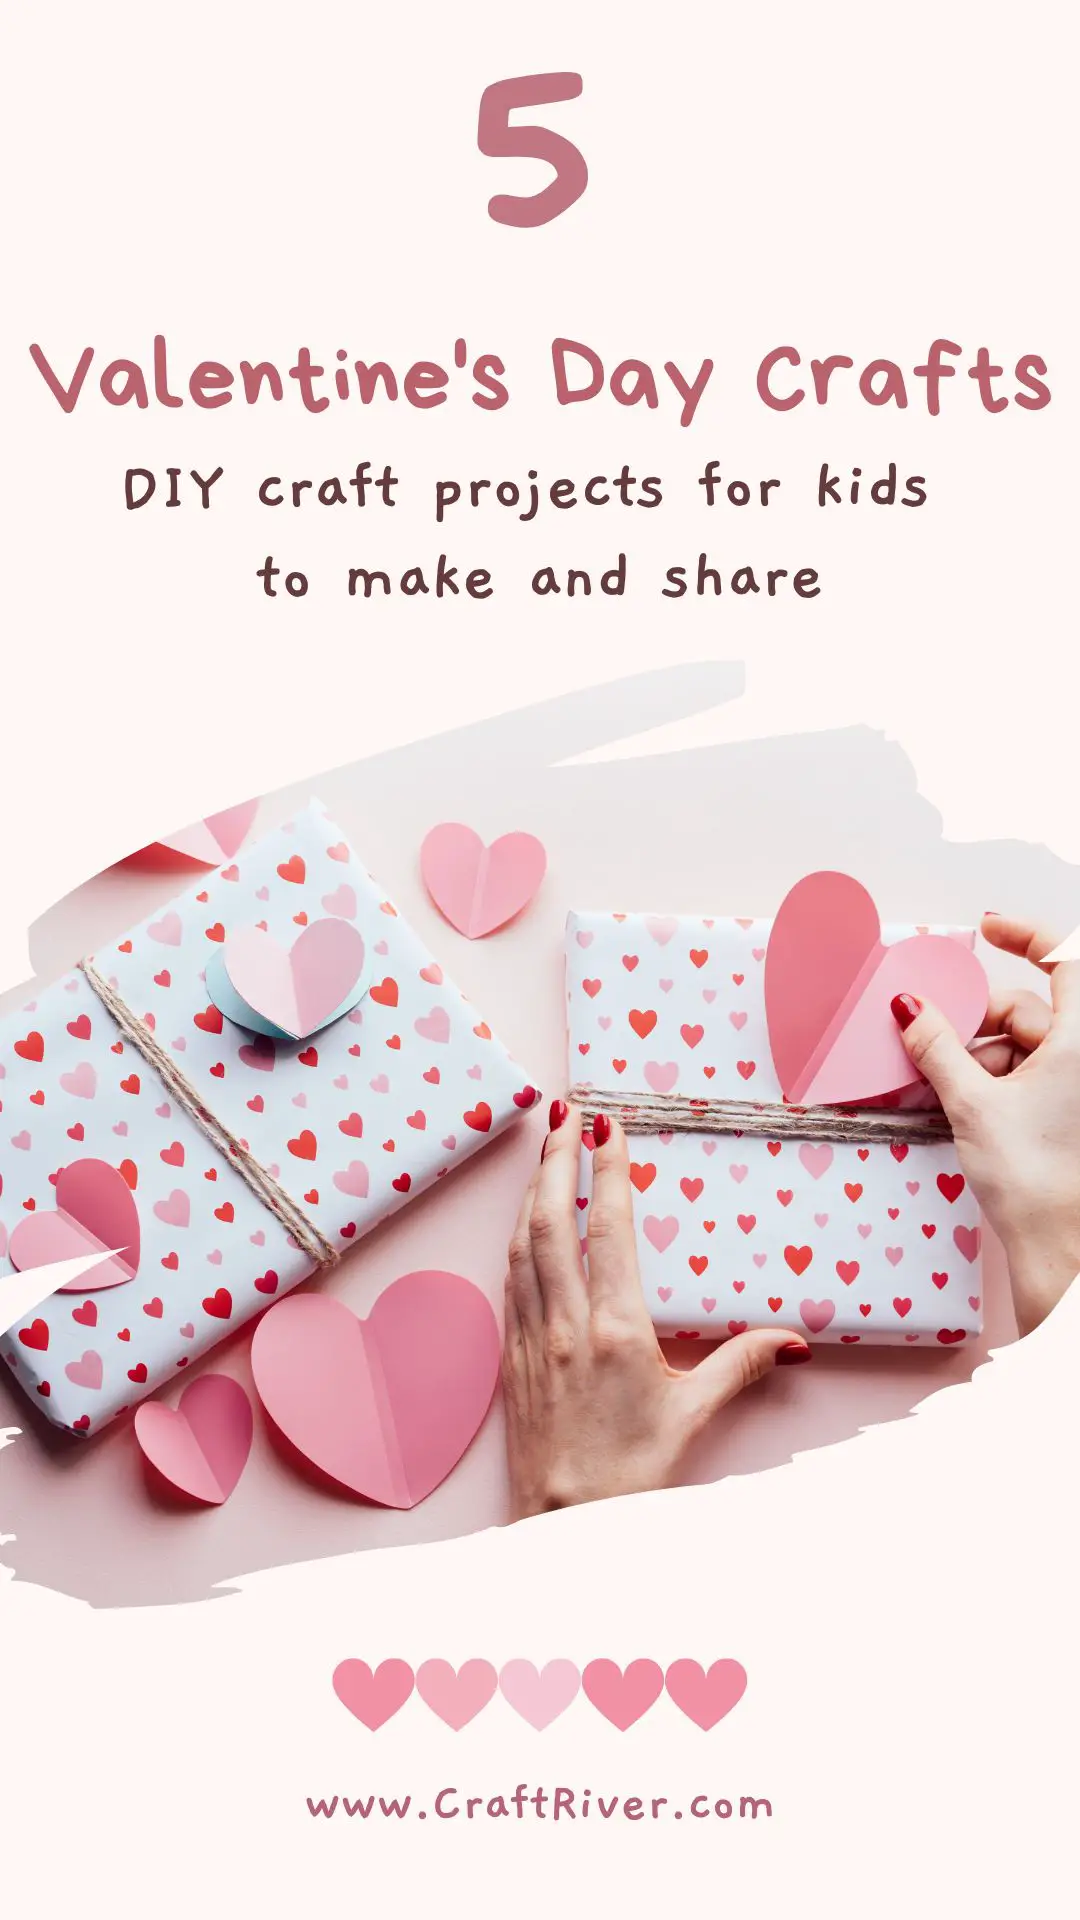 5 Adorable DIY Valentine's Day Crafts for Kids to Make and Share